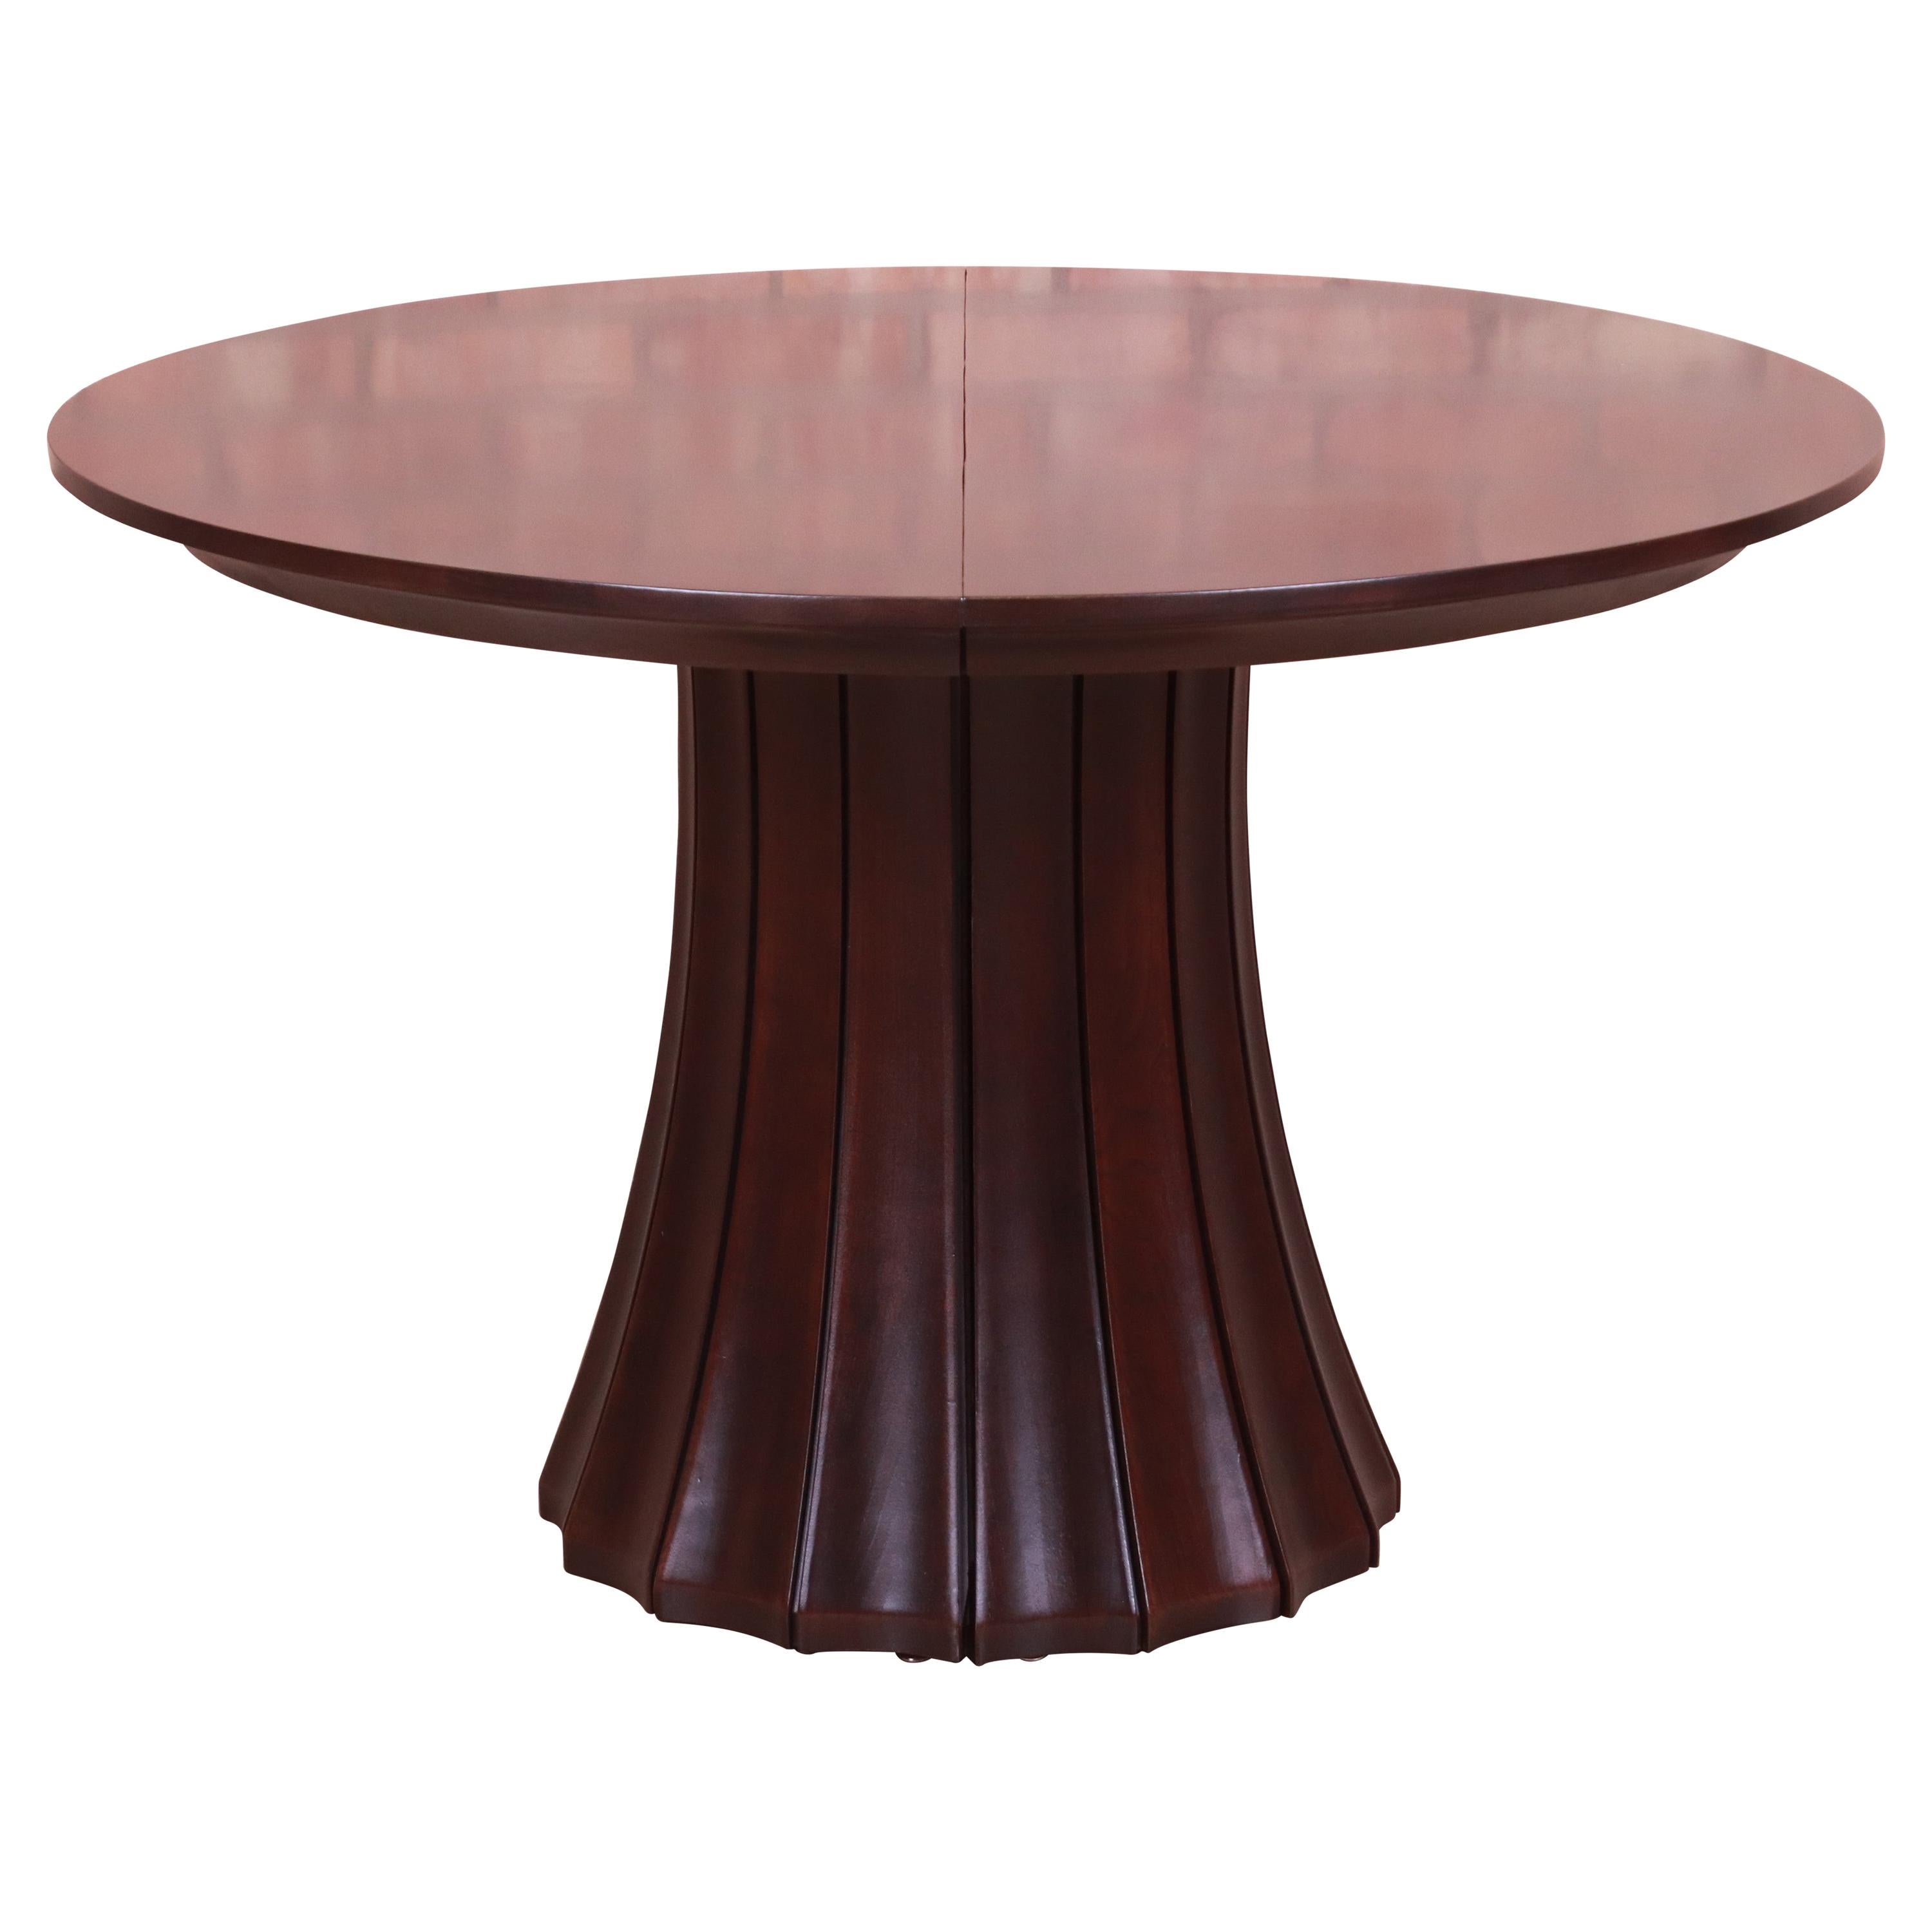 Stickley Modern Dark Mahogany Pedestal Extension Dining Table, Newly Refinished